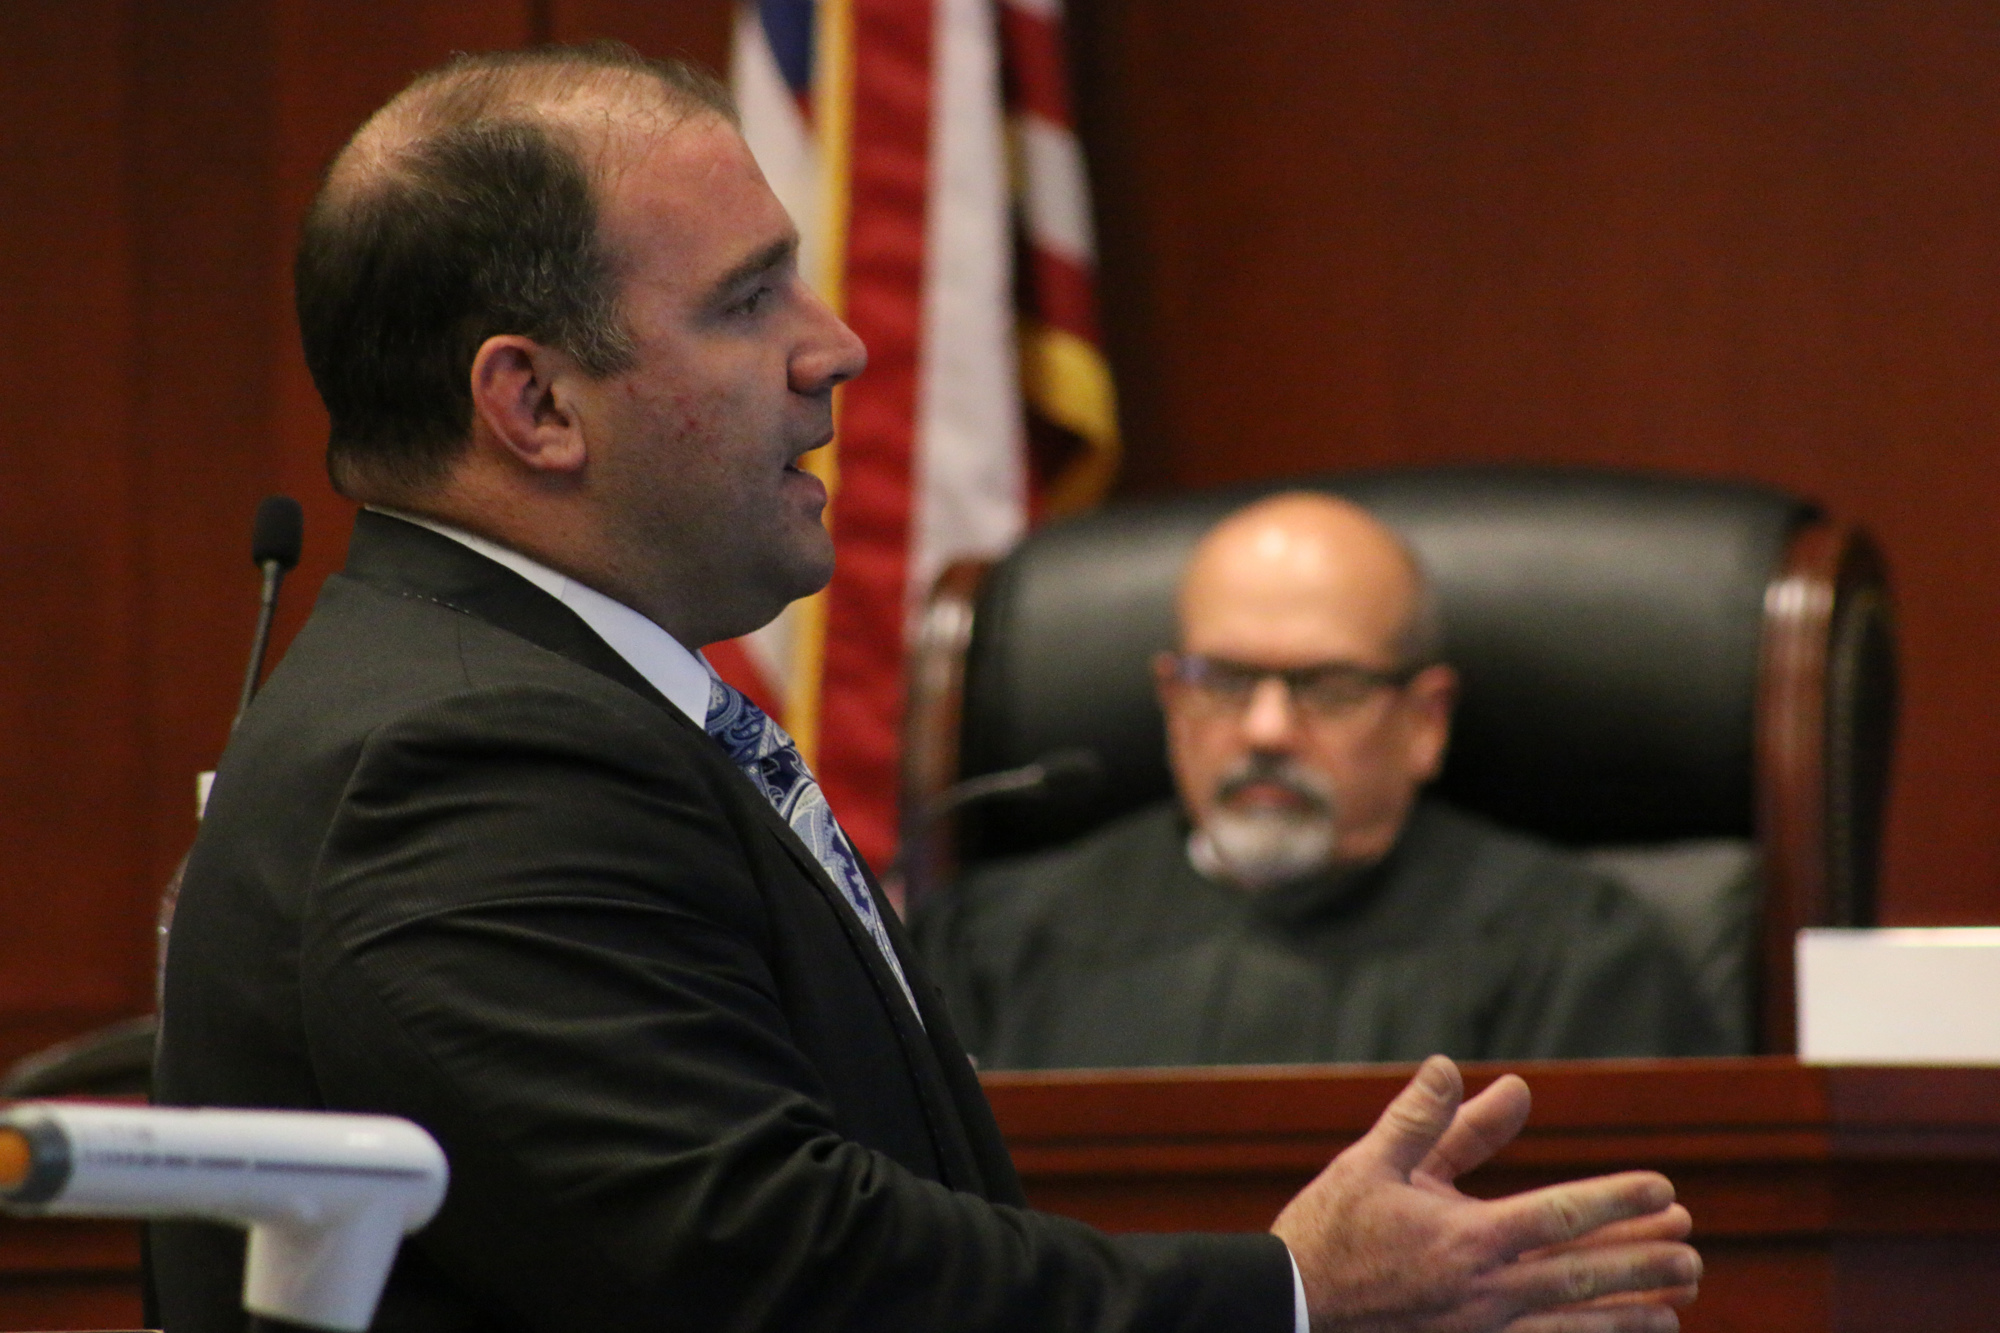 Defense Attorney Aaron Delgado speaks to the jury during closing arguments on Friday, Aug. 10. Photo by Jarleene Almenas